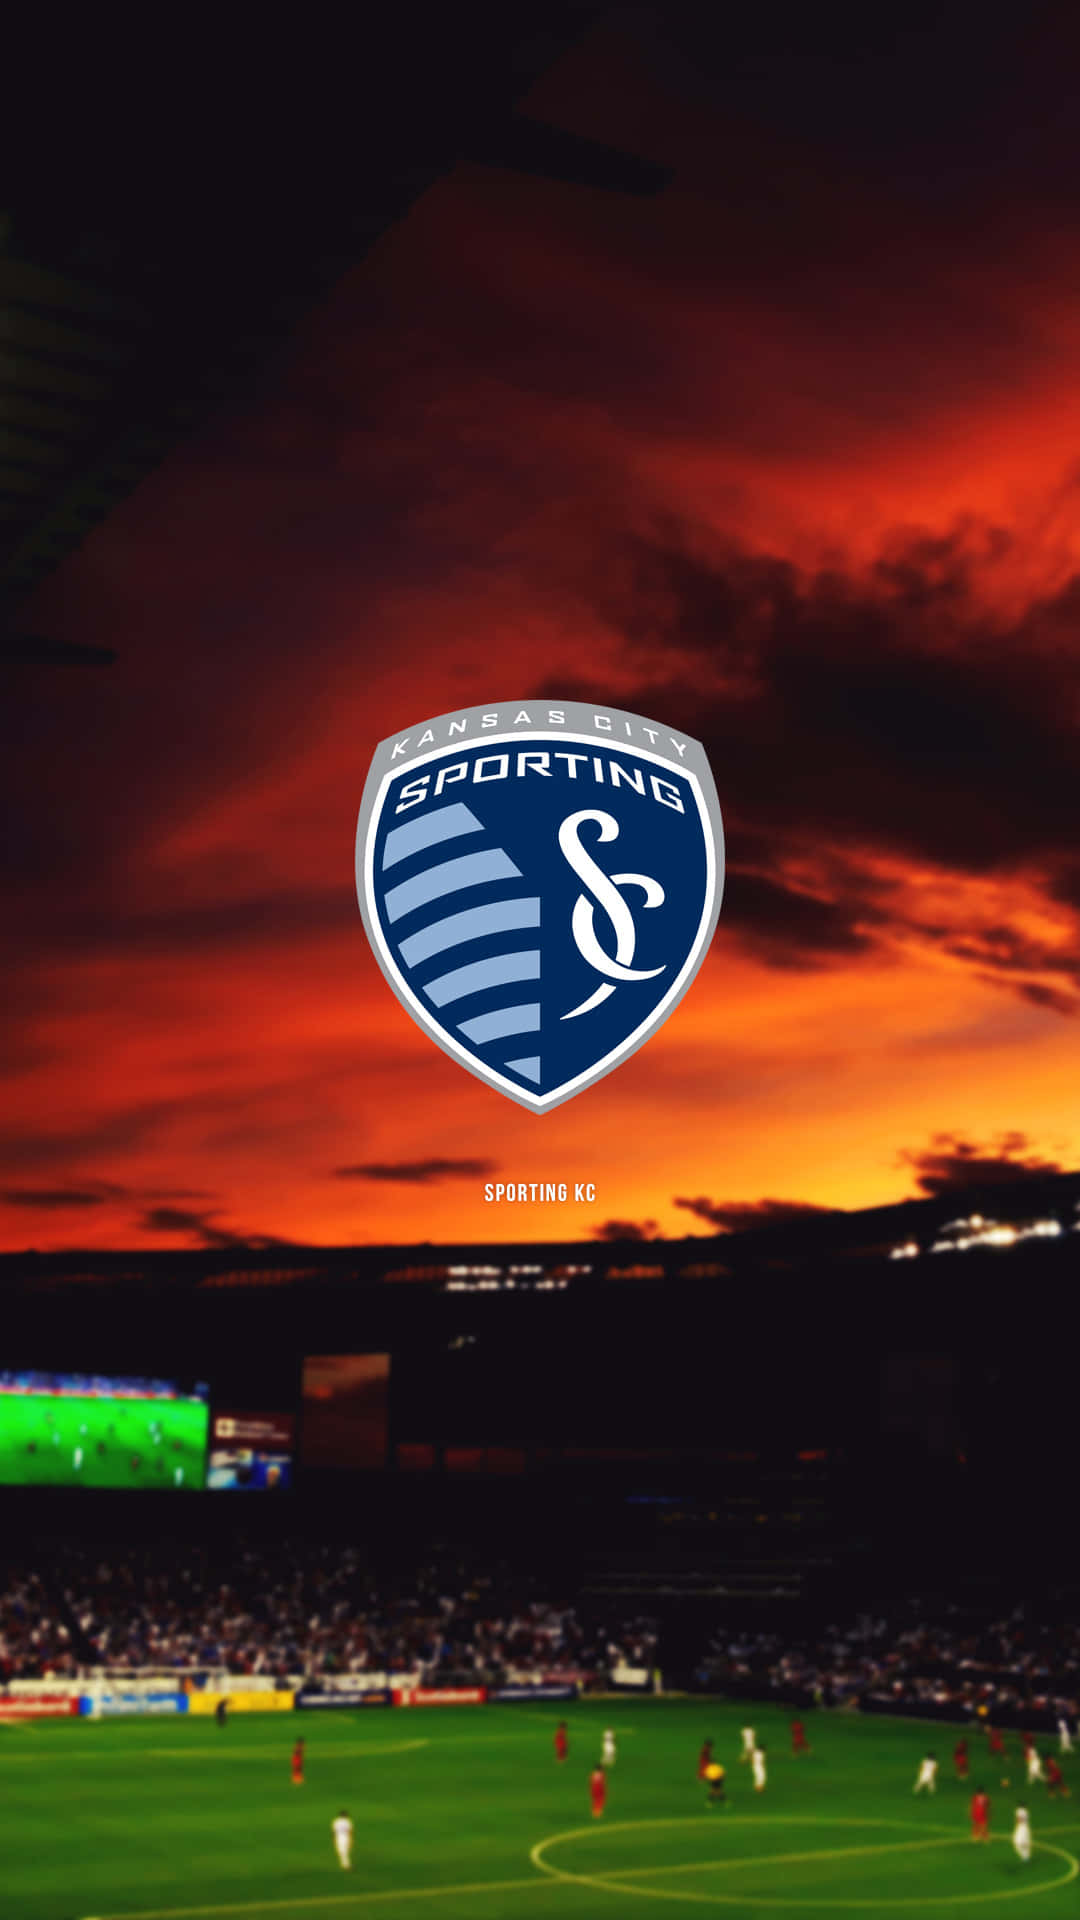 Sportingkansas City Solnedgång (this Could Be A Potential Title For A Wallpaper Featuring The Sunset Over The Sporting Kansas City Soccer Stadium.) Wallpaper